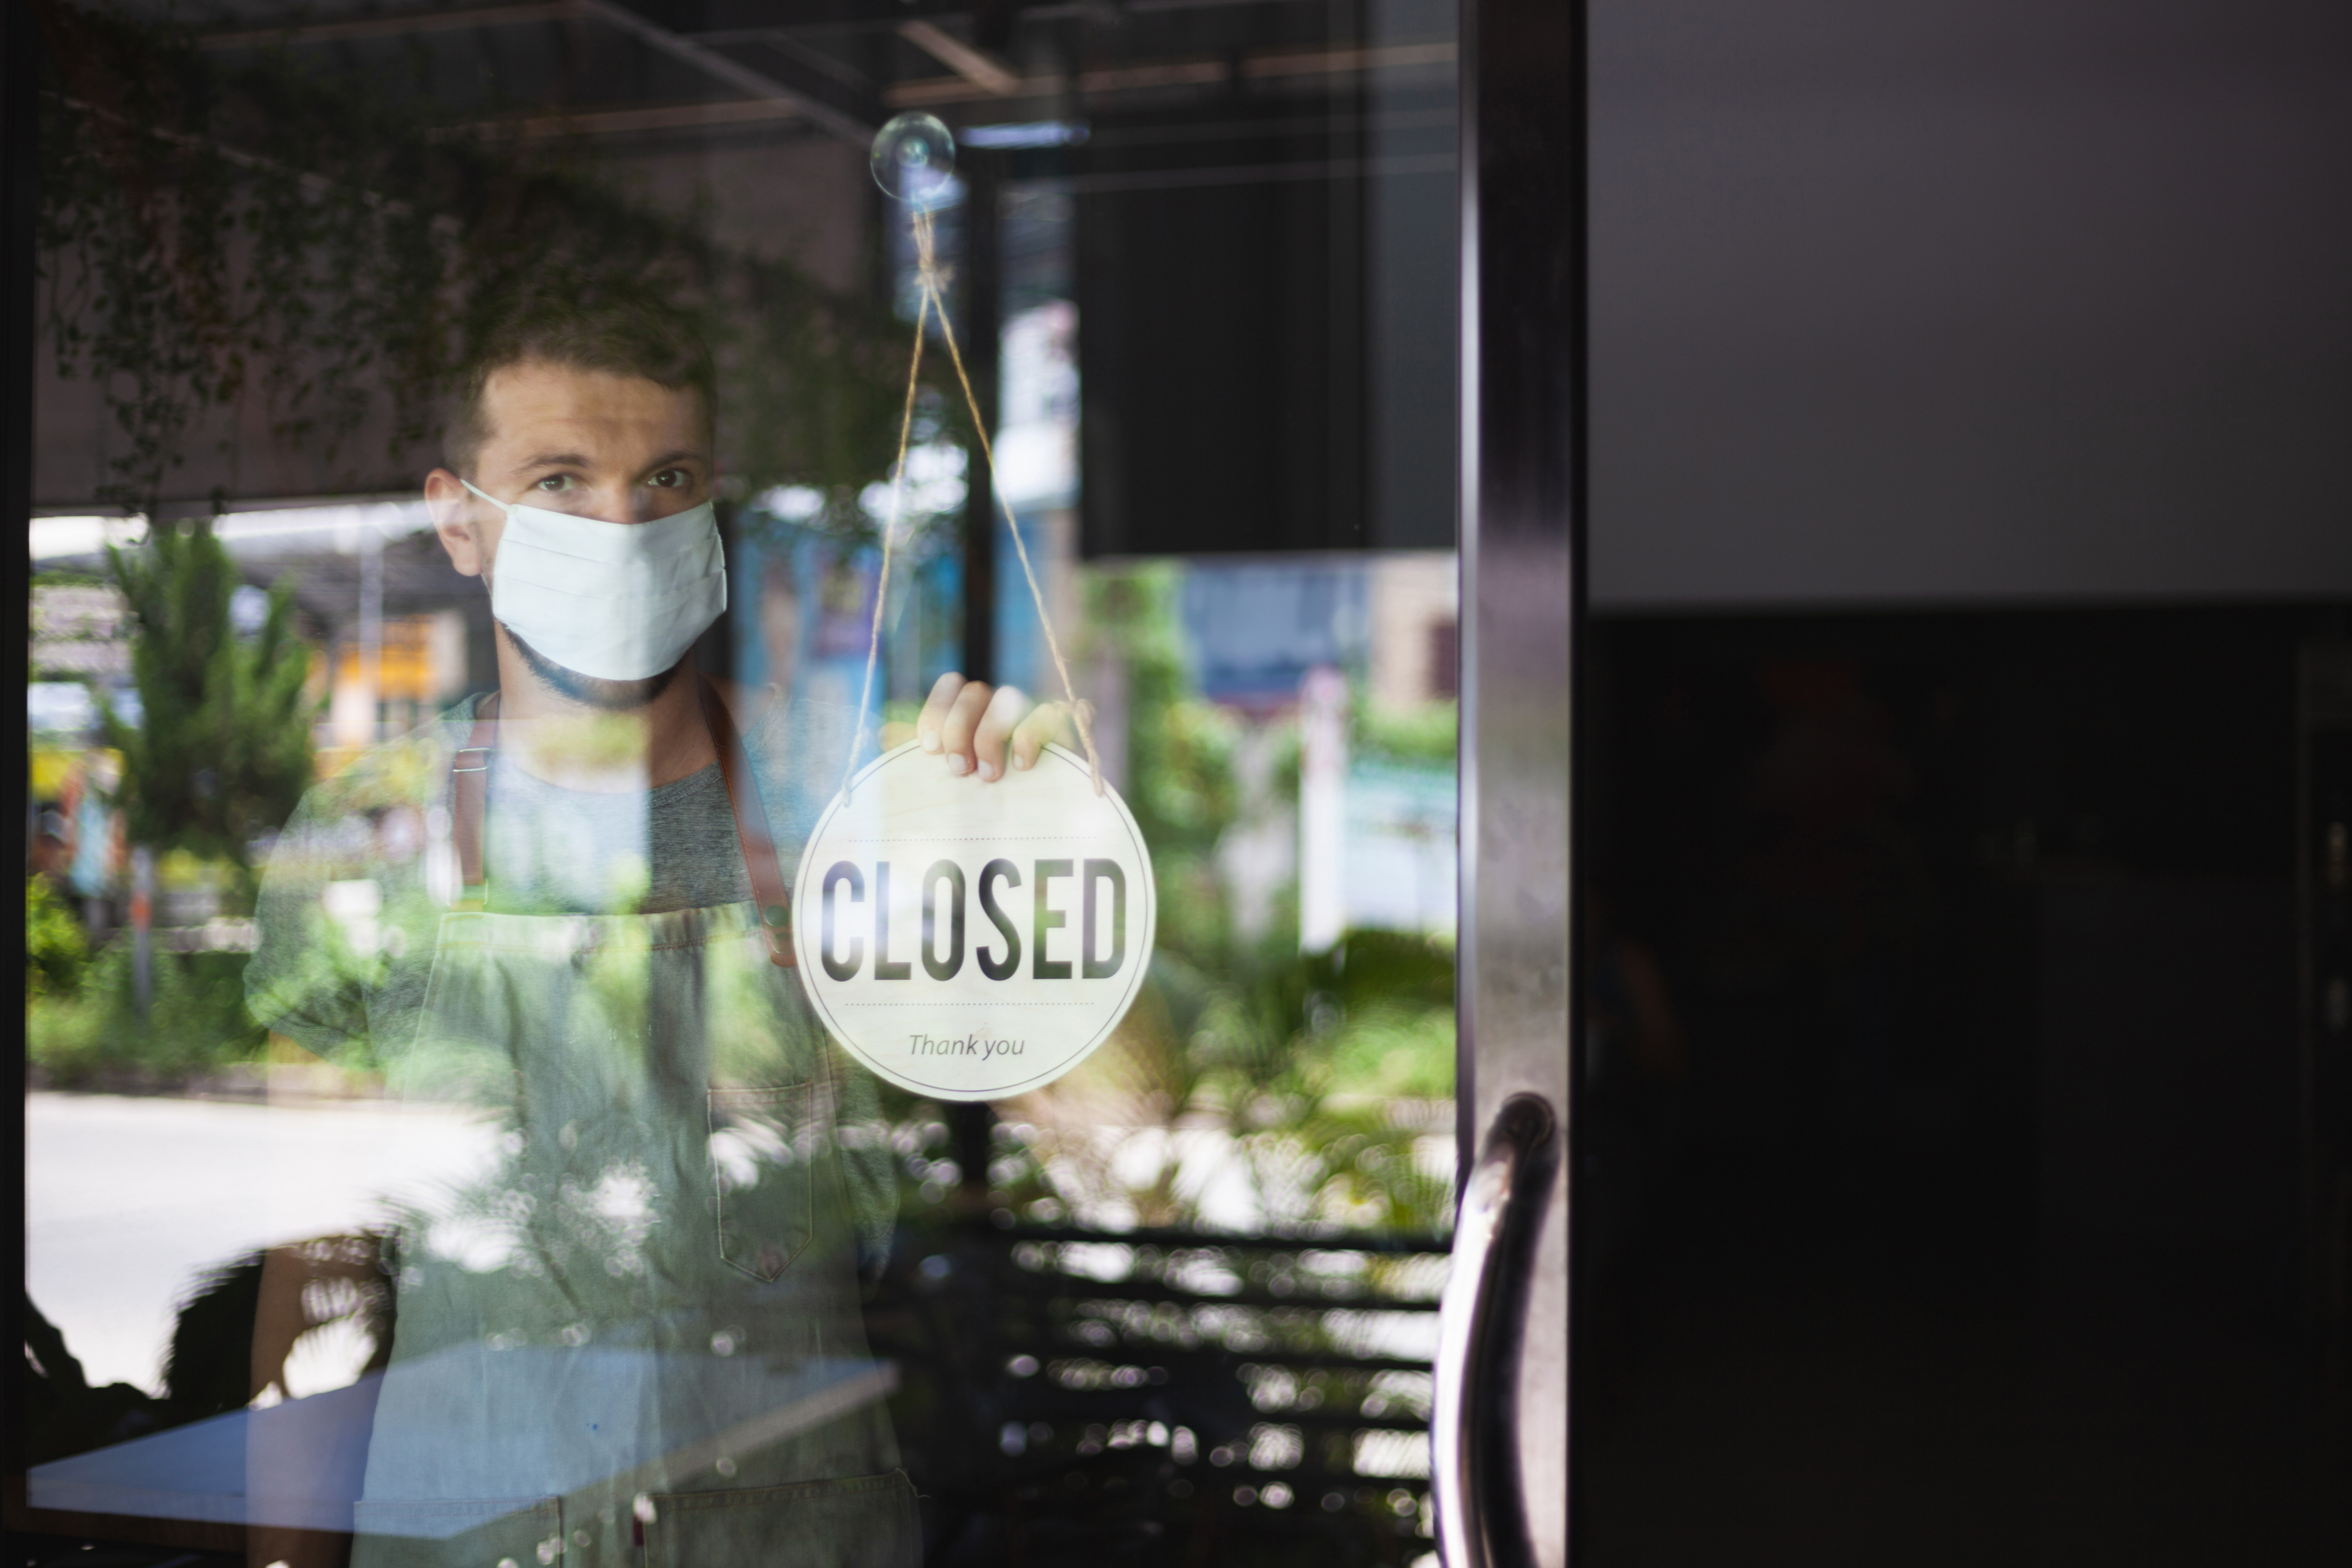 A man closes his business due to the COVID-19 pandemic.